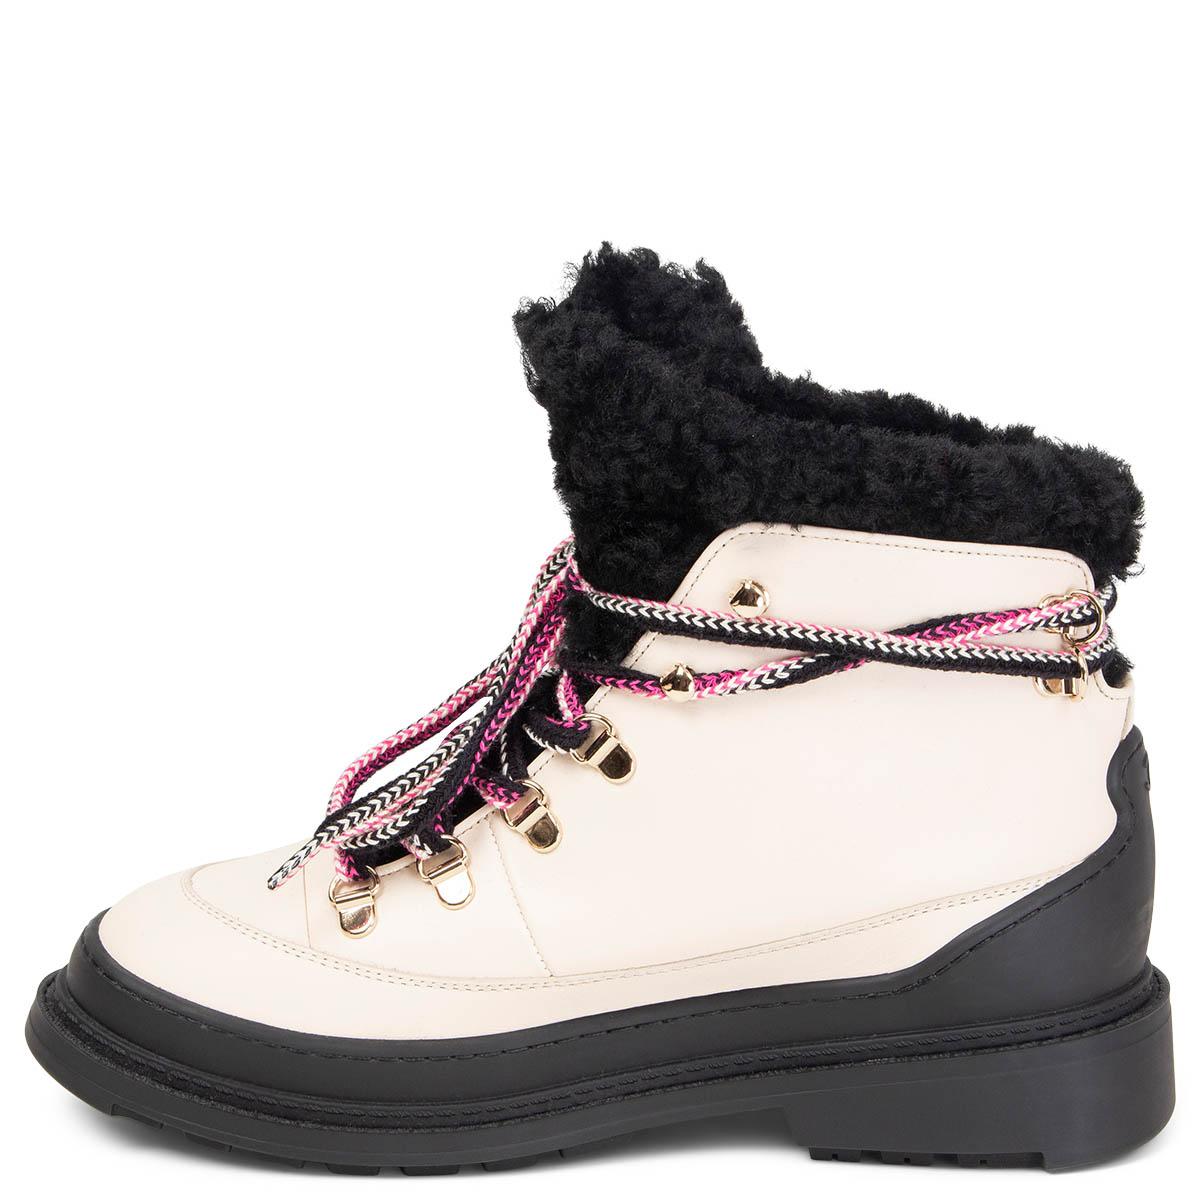 Black CHANEL ivory leather 2020 SHEARLING LINED LACE UP Boots Shoes 37.5 20A For Sale